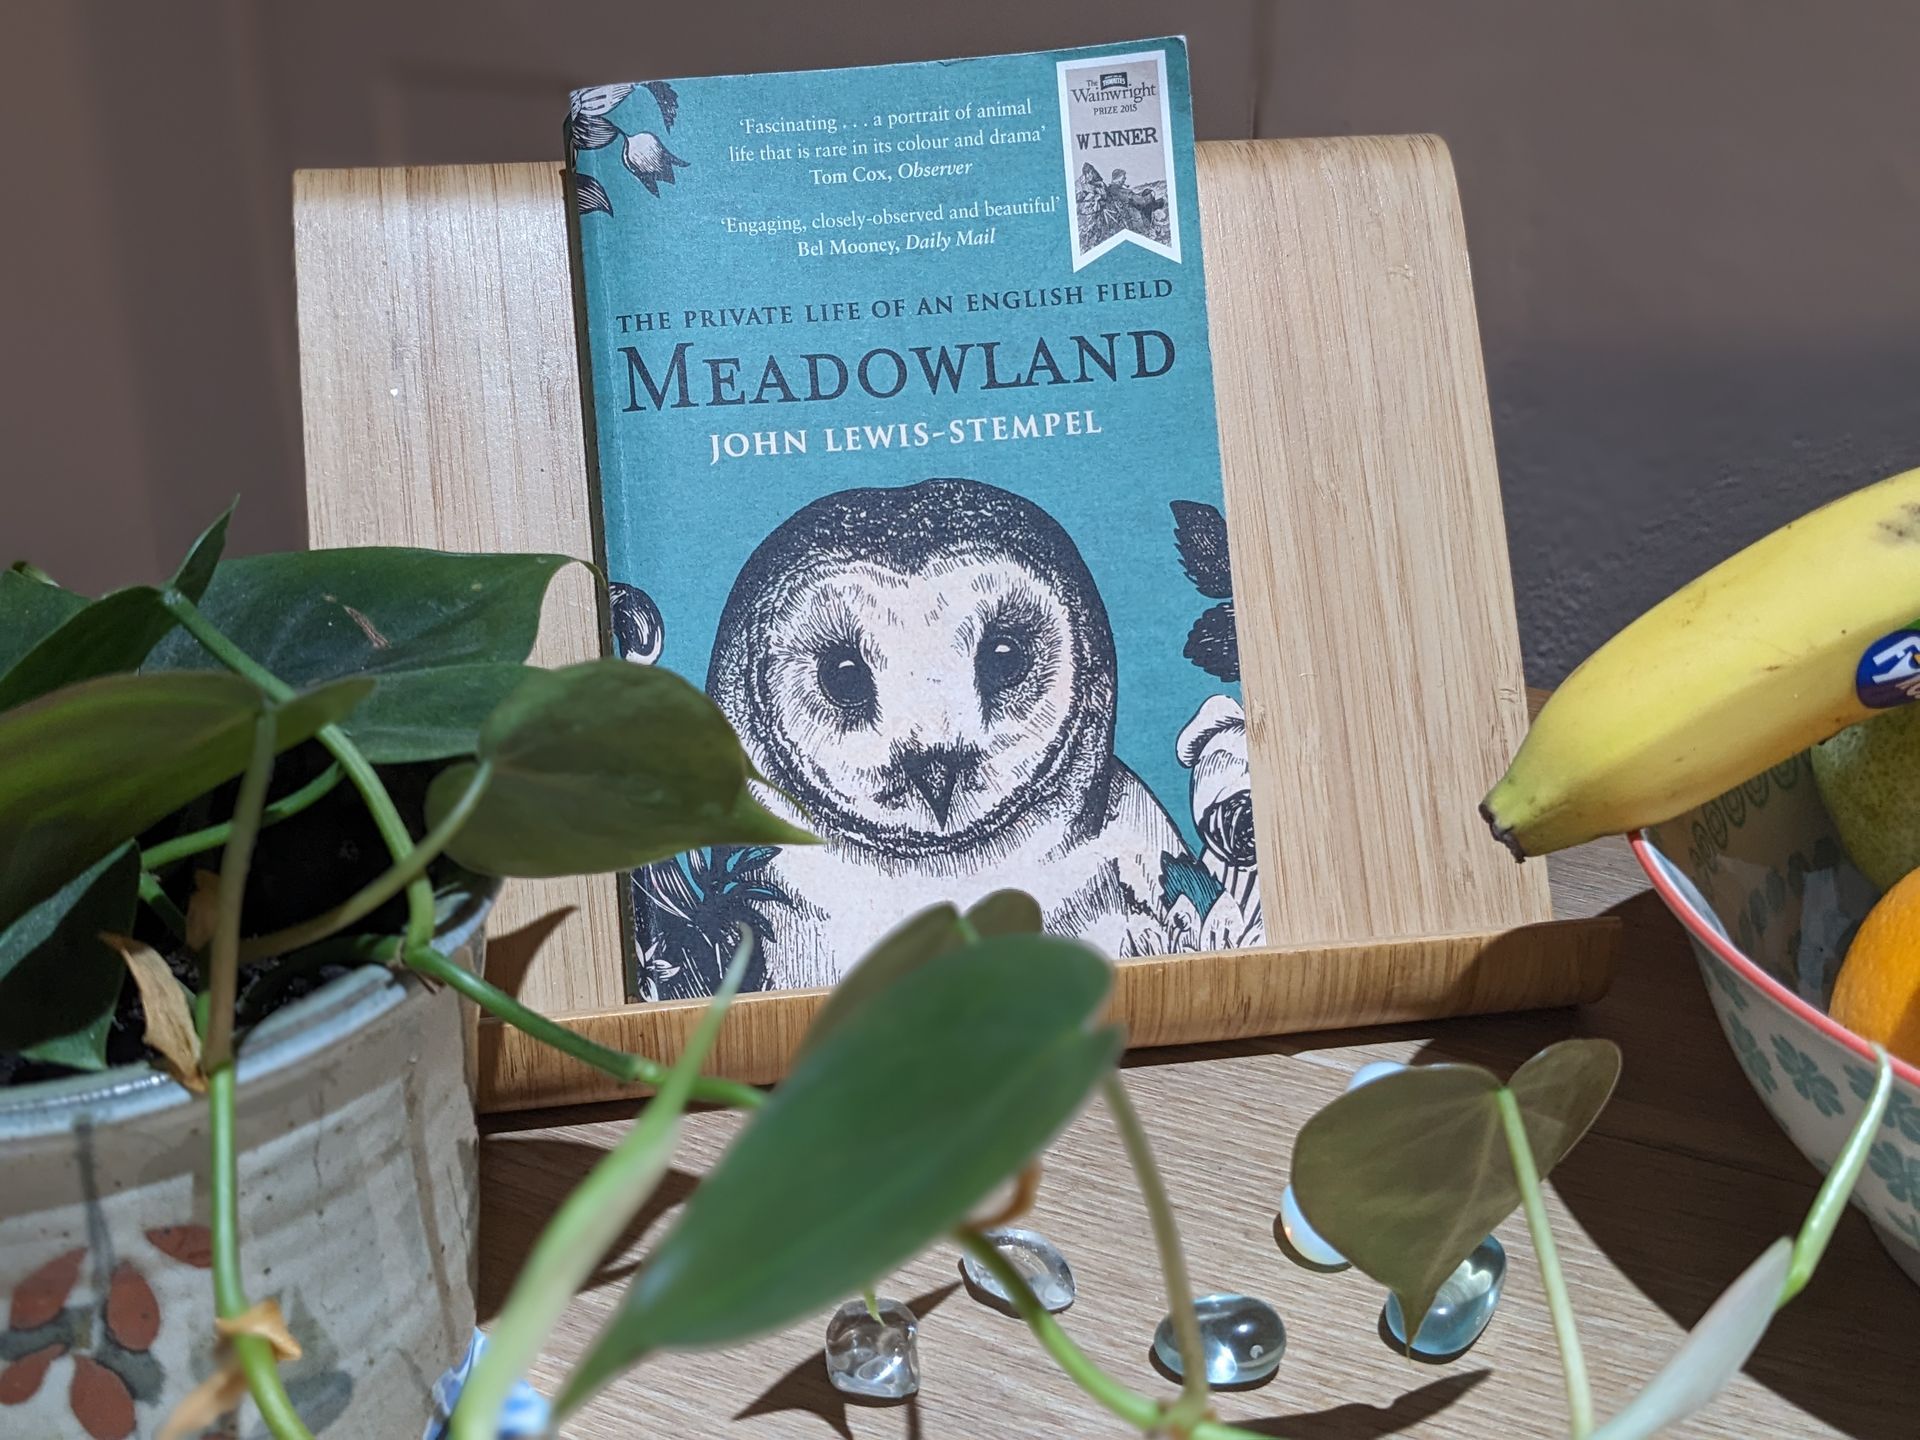 Meadowland by John Lewis-Stempel - A Book Review by Sue Cartwright, Spiral Leaf